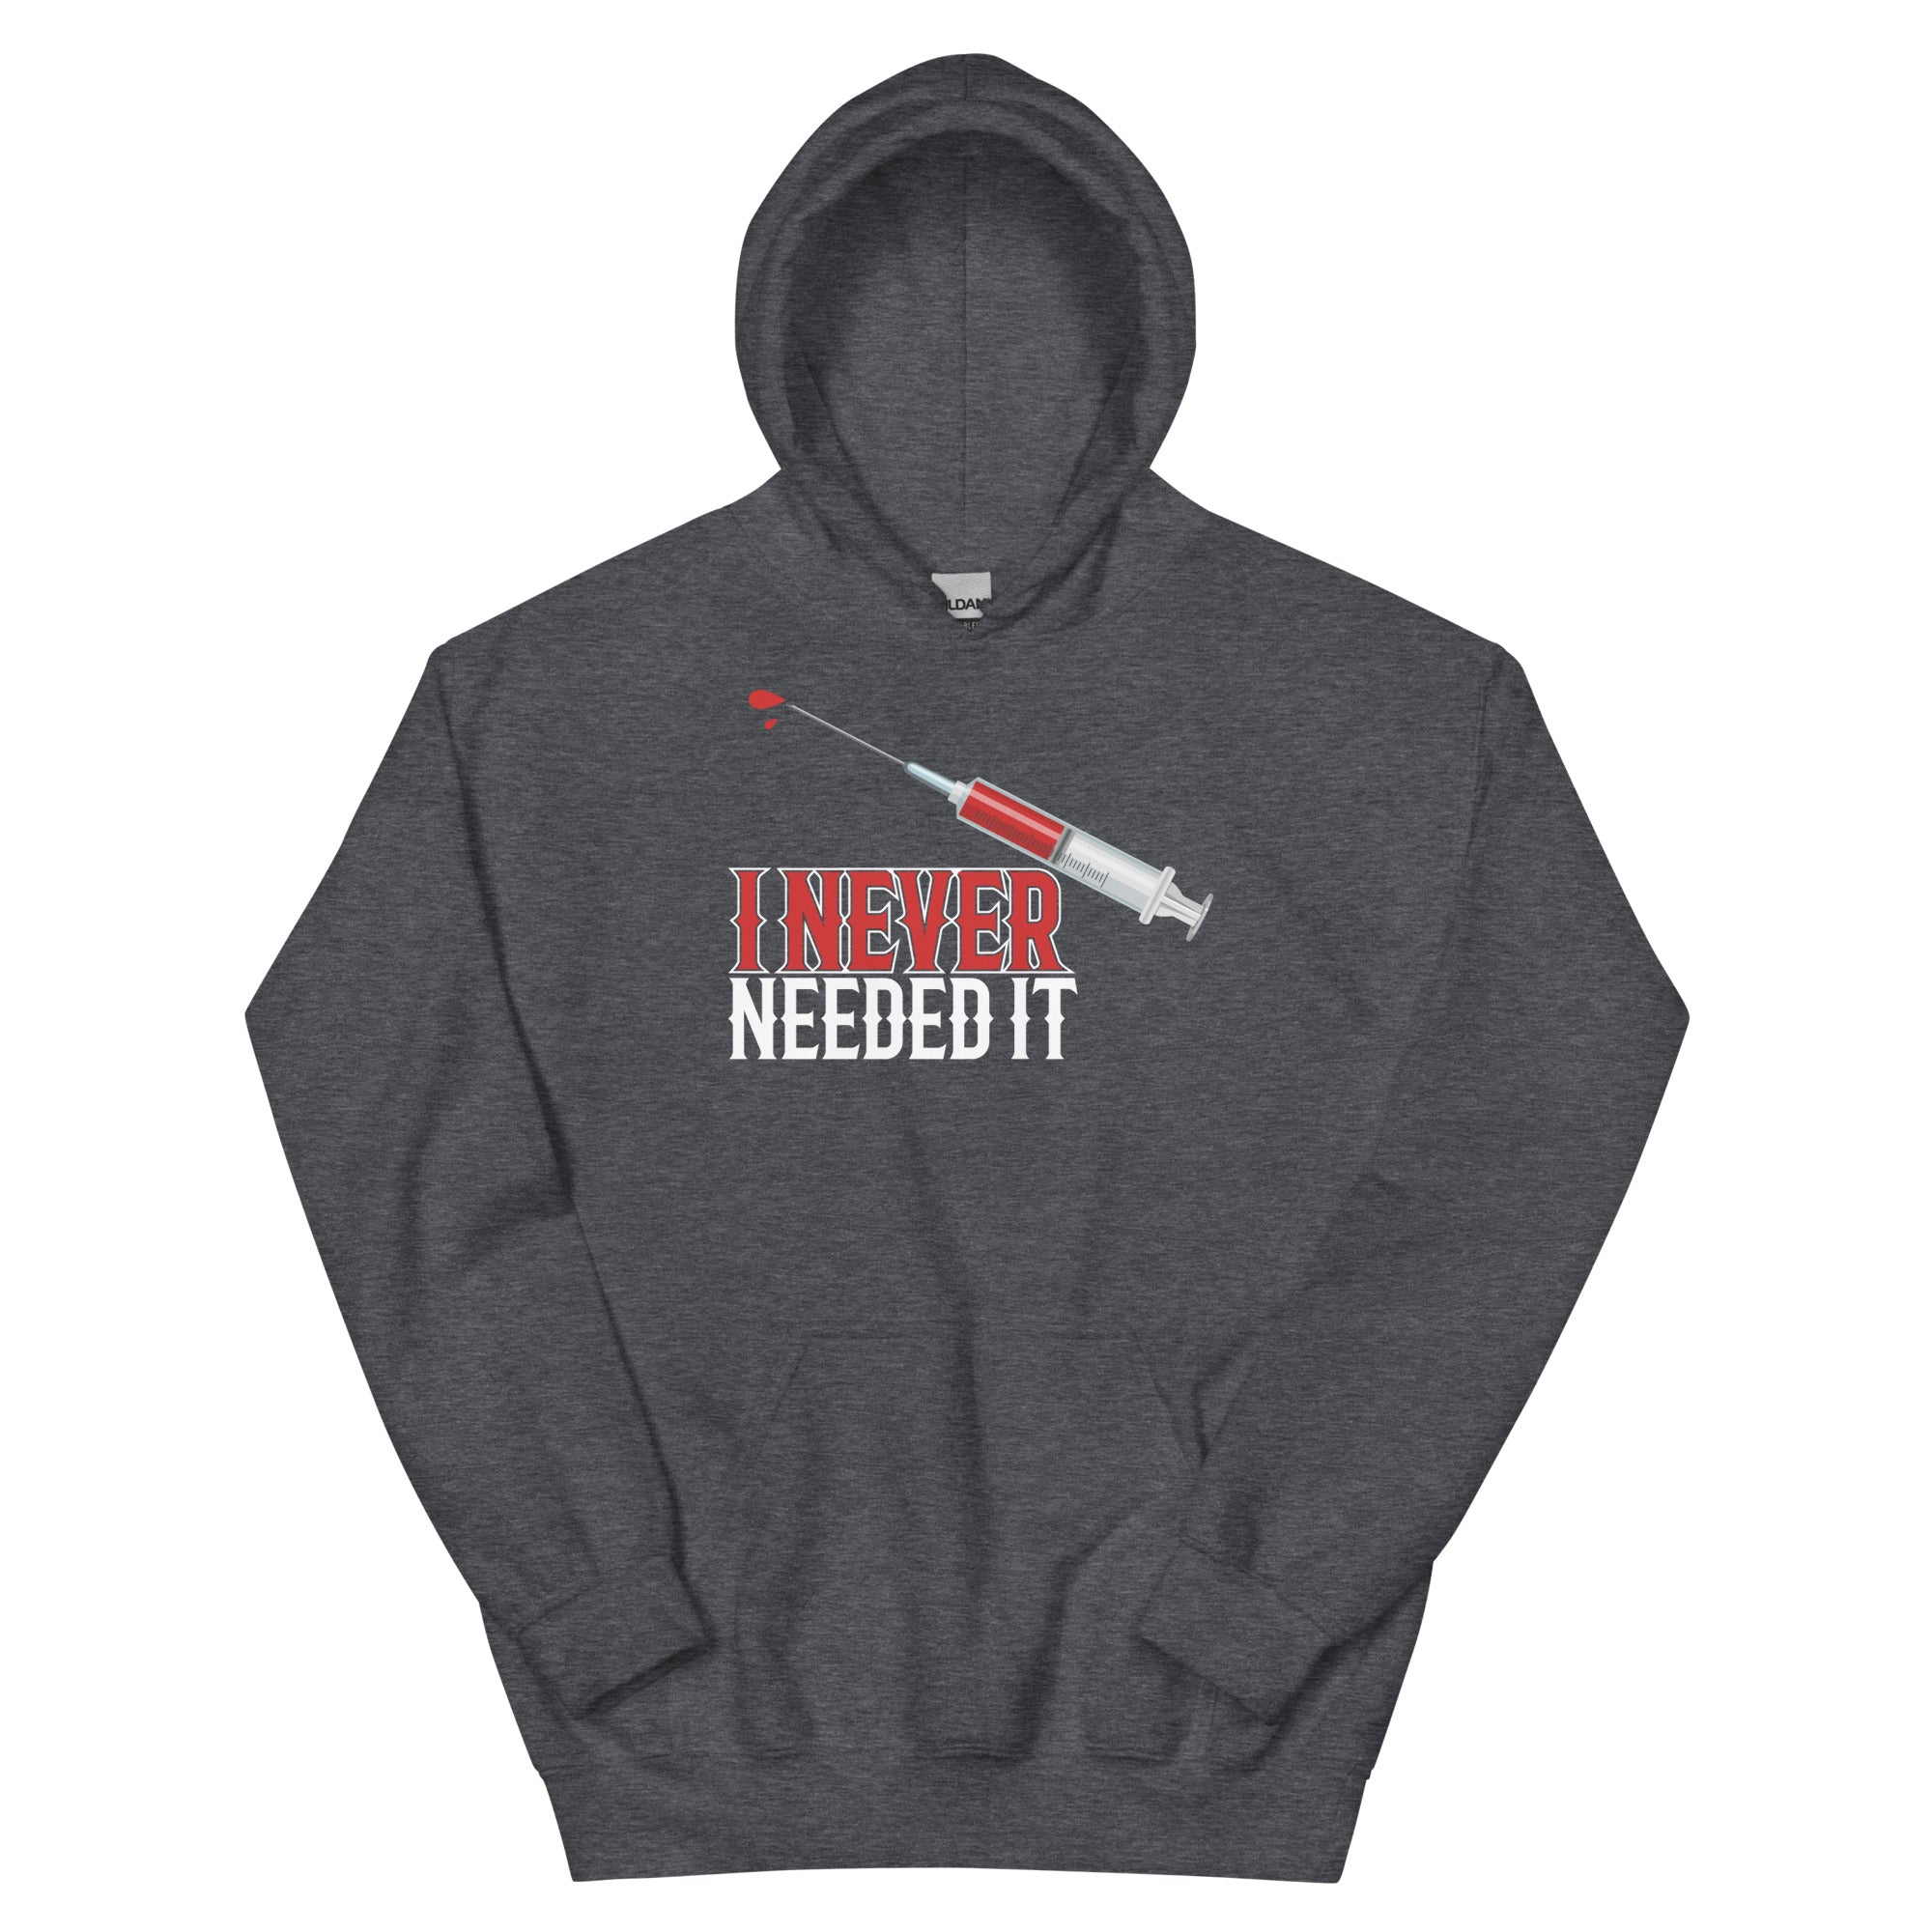 I NEVER NEEDED IT WOMENS FRONT AND BACK HOODIE